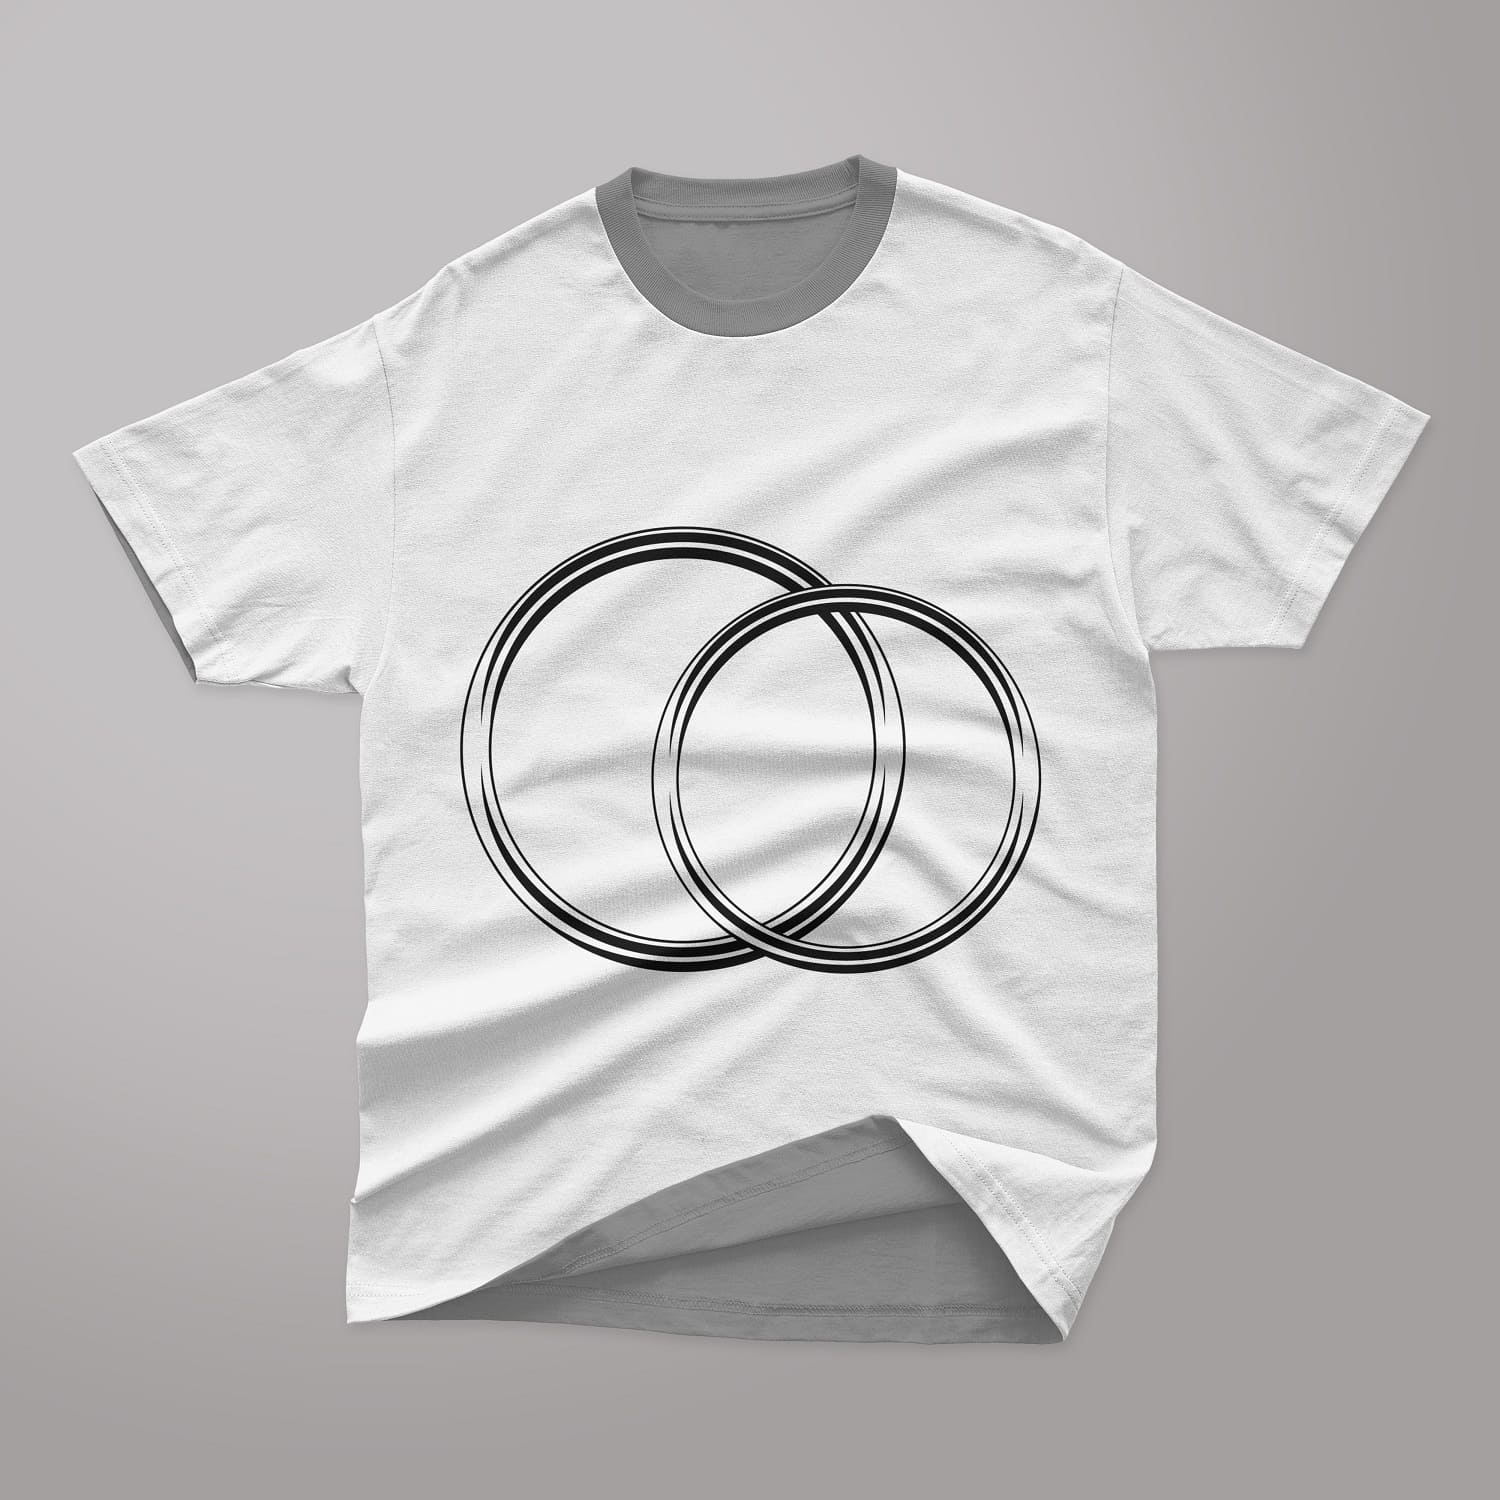 Two thin gold wedding rings are drawn in black on the T-shirt.